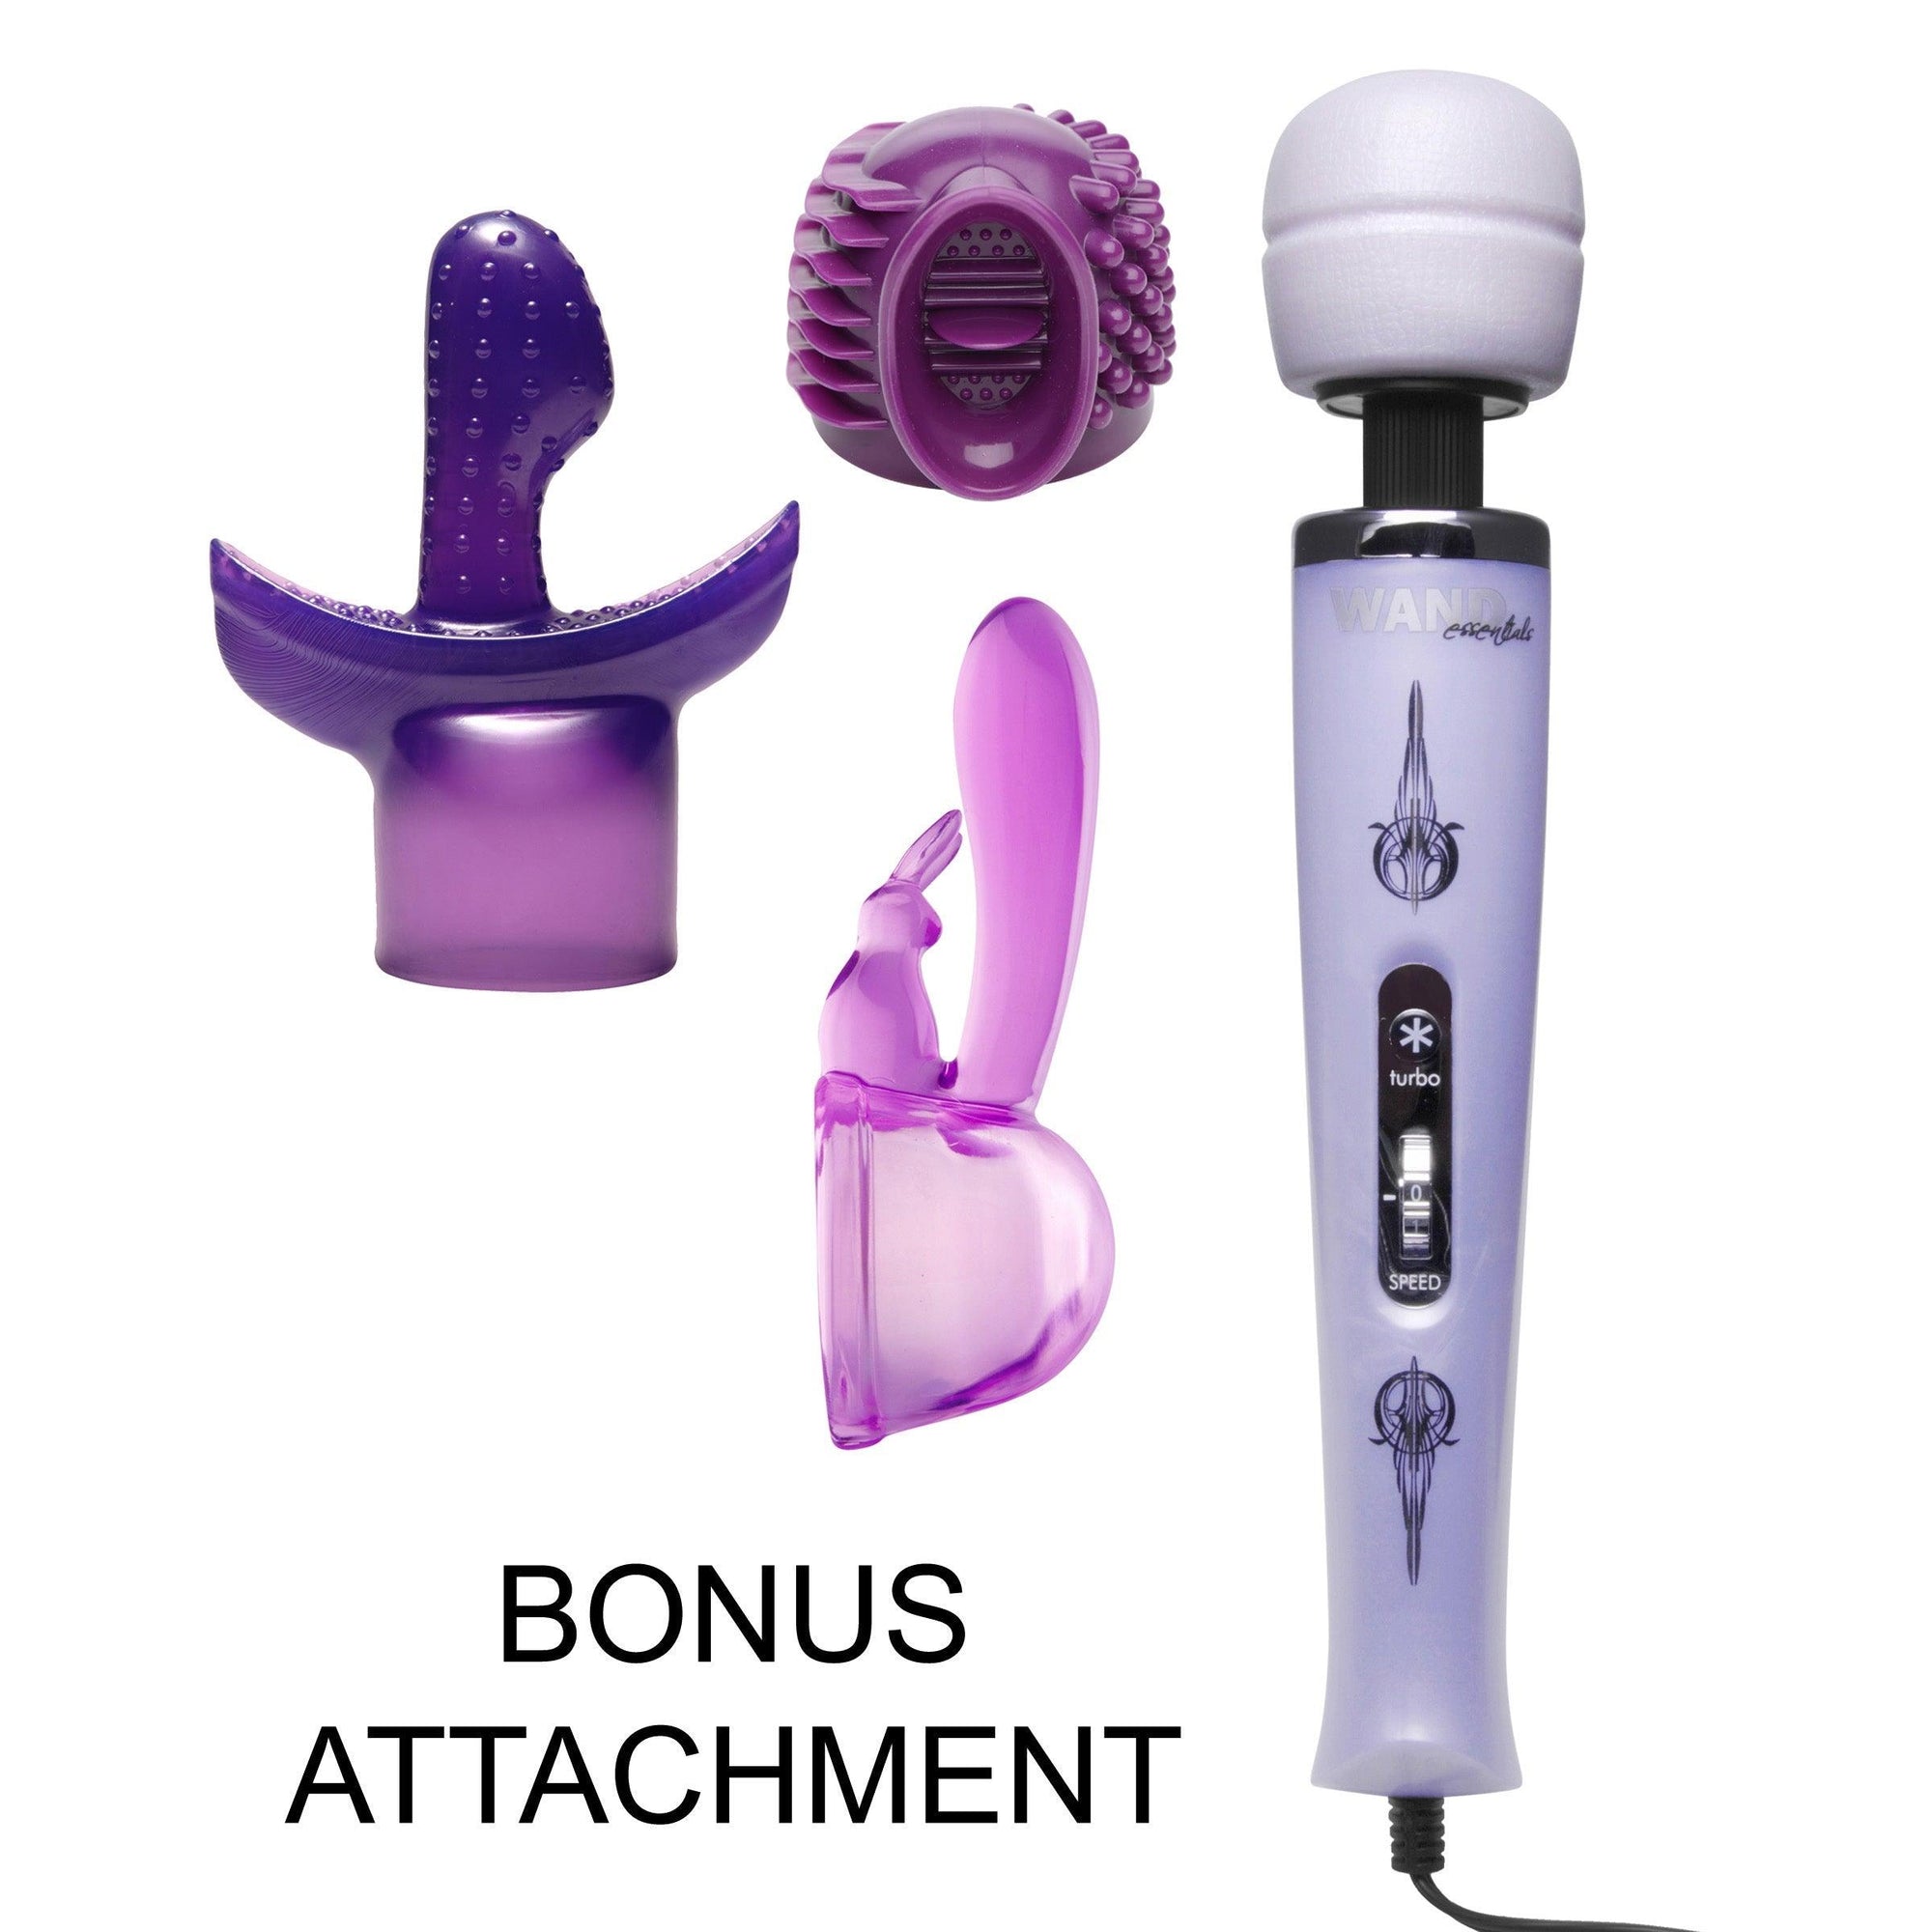 Turbo Pleasure Wand Kit with Free Attachment